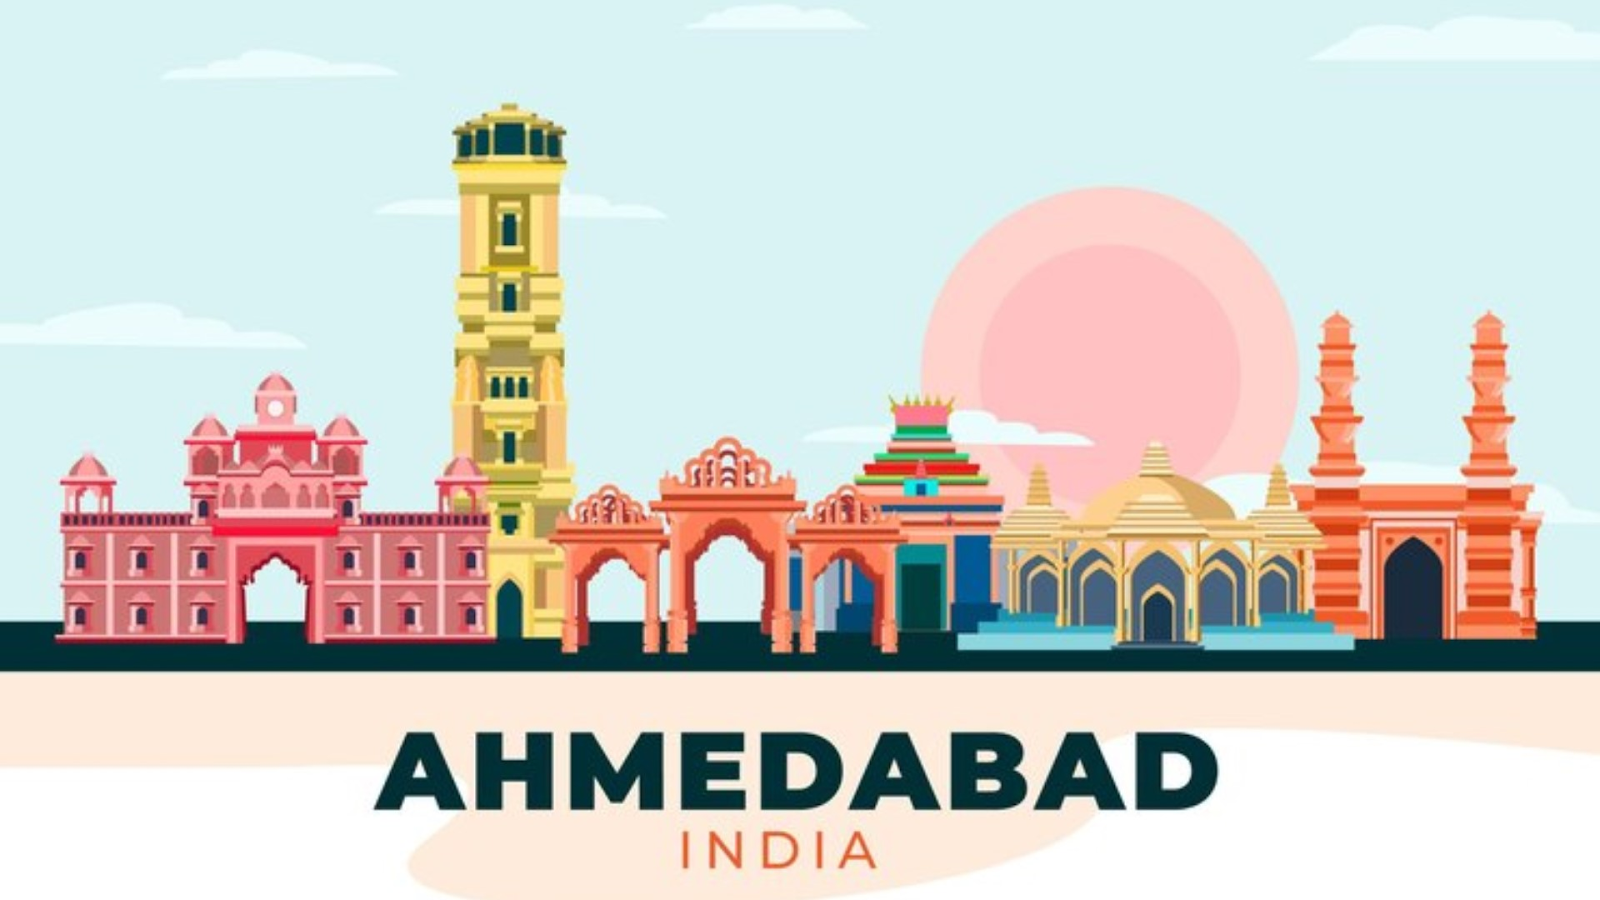 Ahmedabad is historic and clean, offering a unique blend of tradition and modernity